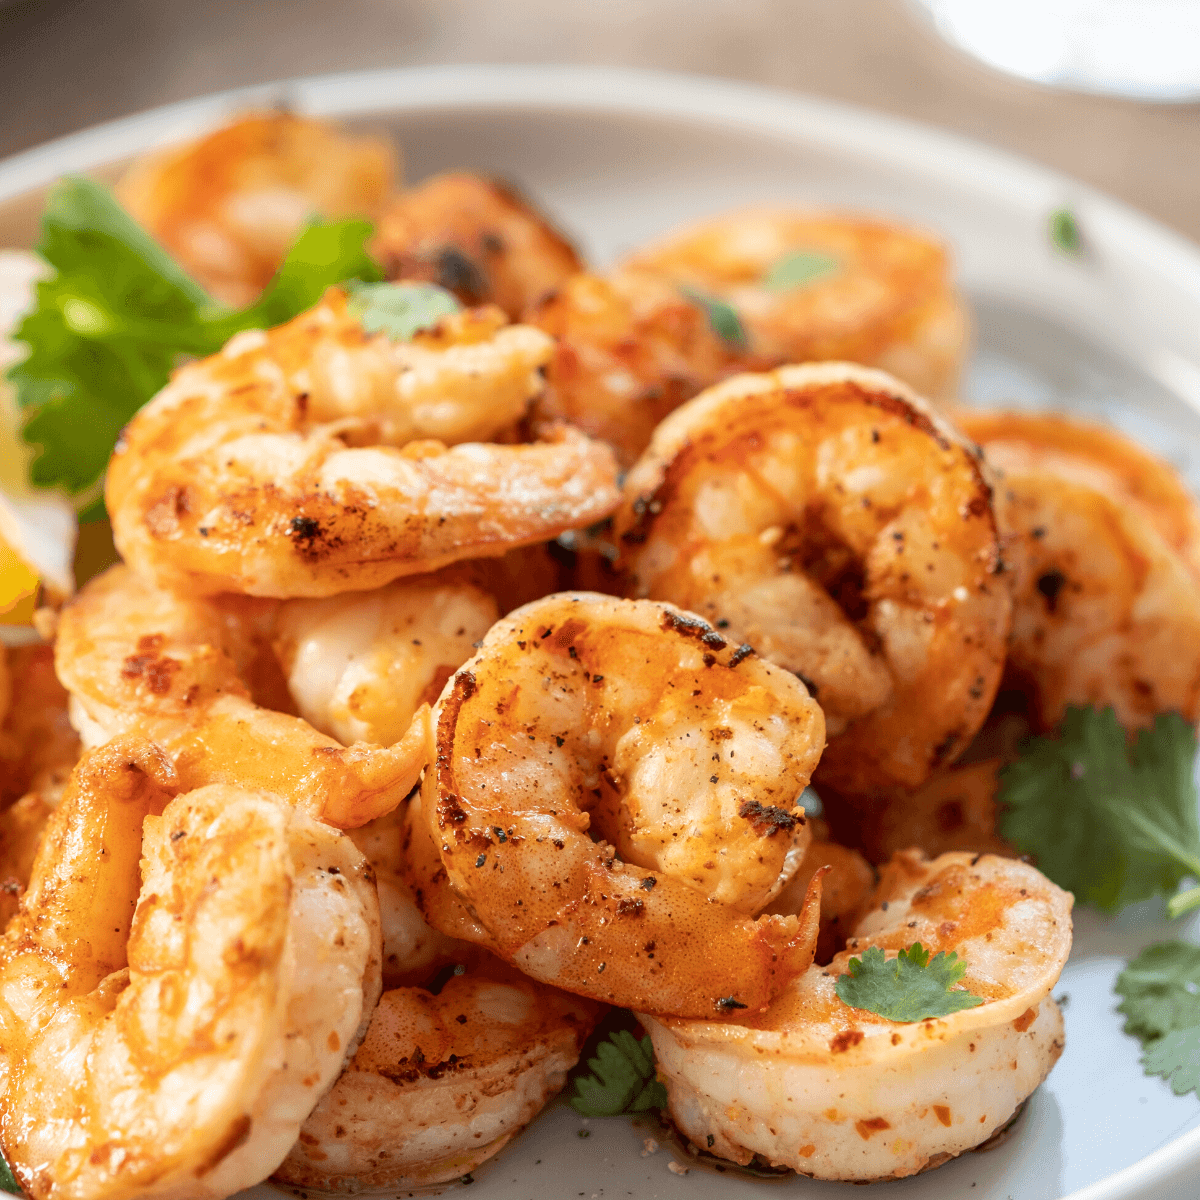 Grilled Shrimp with Parsley and lemon in White casserole dish 